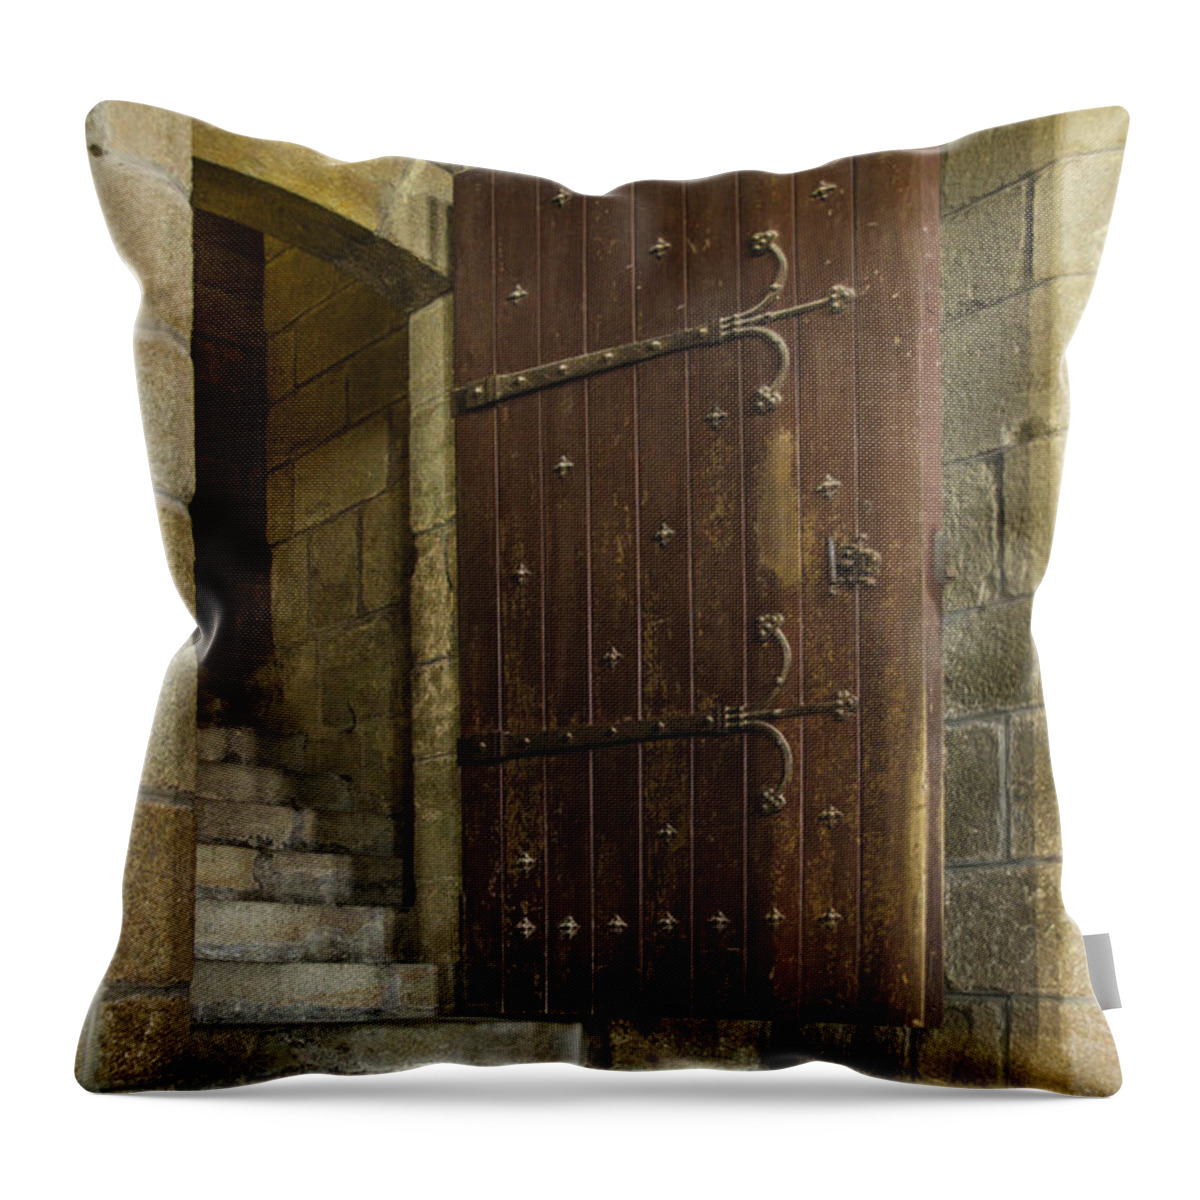 Mont Throw Pillow featuring the photograph Entrance by Marta Cavazos-Hernandez